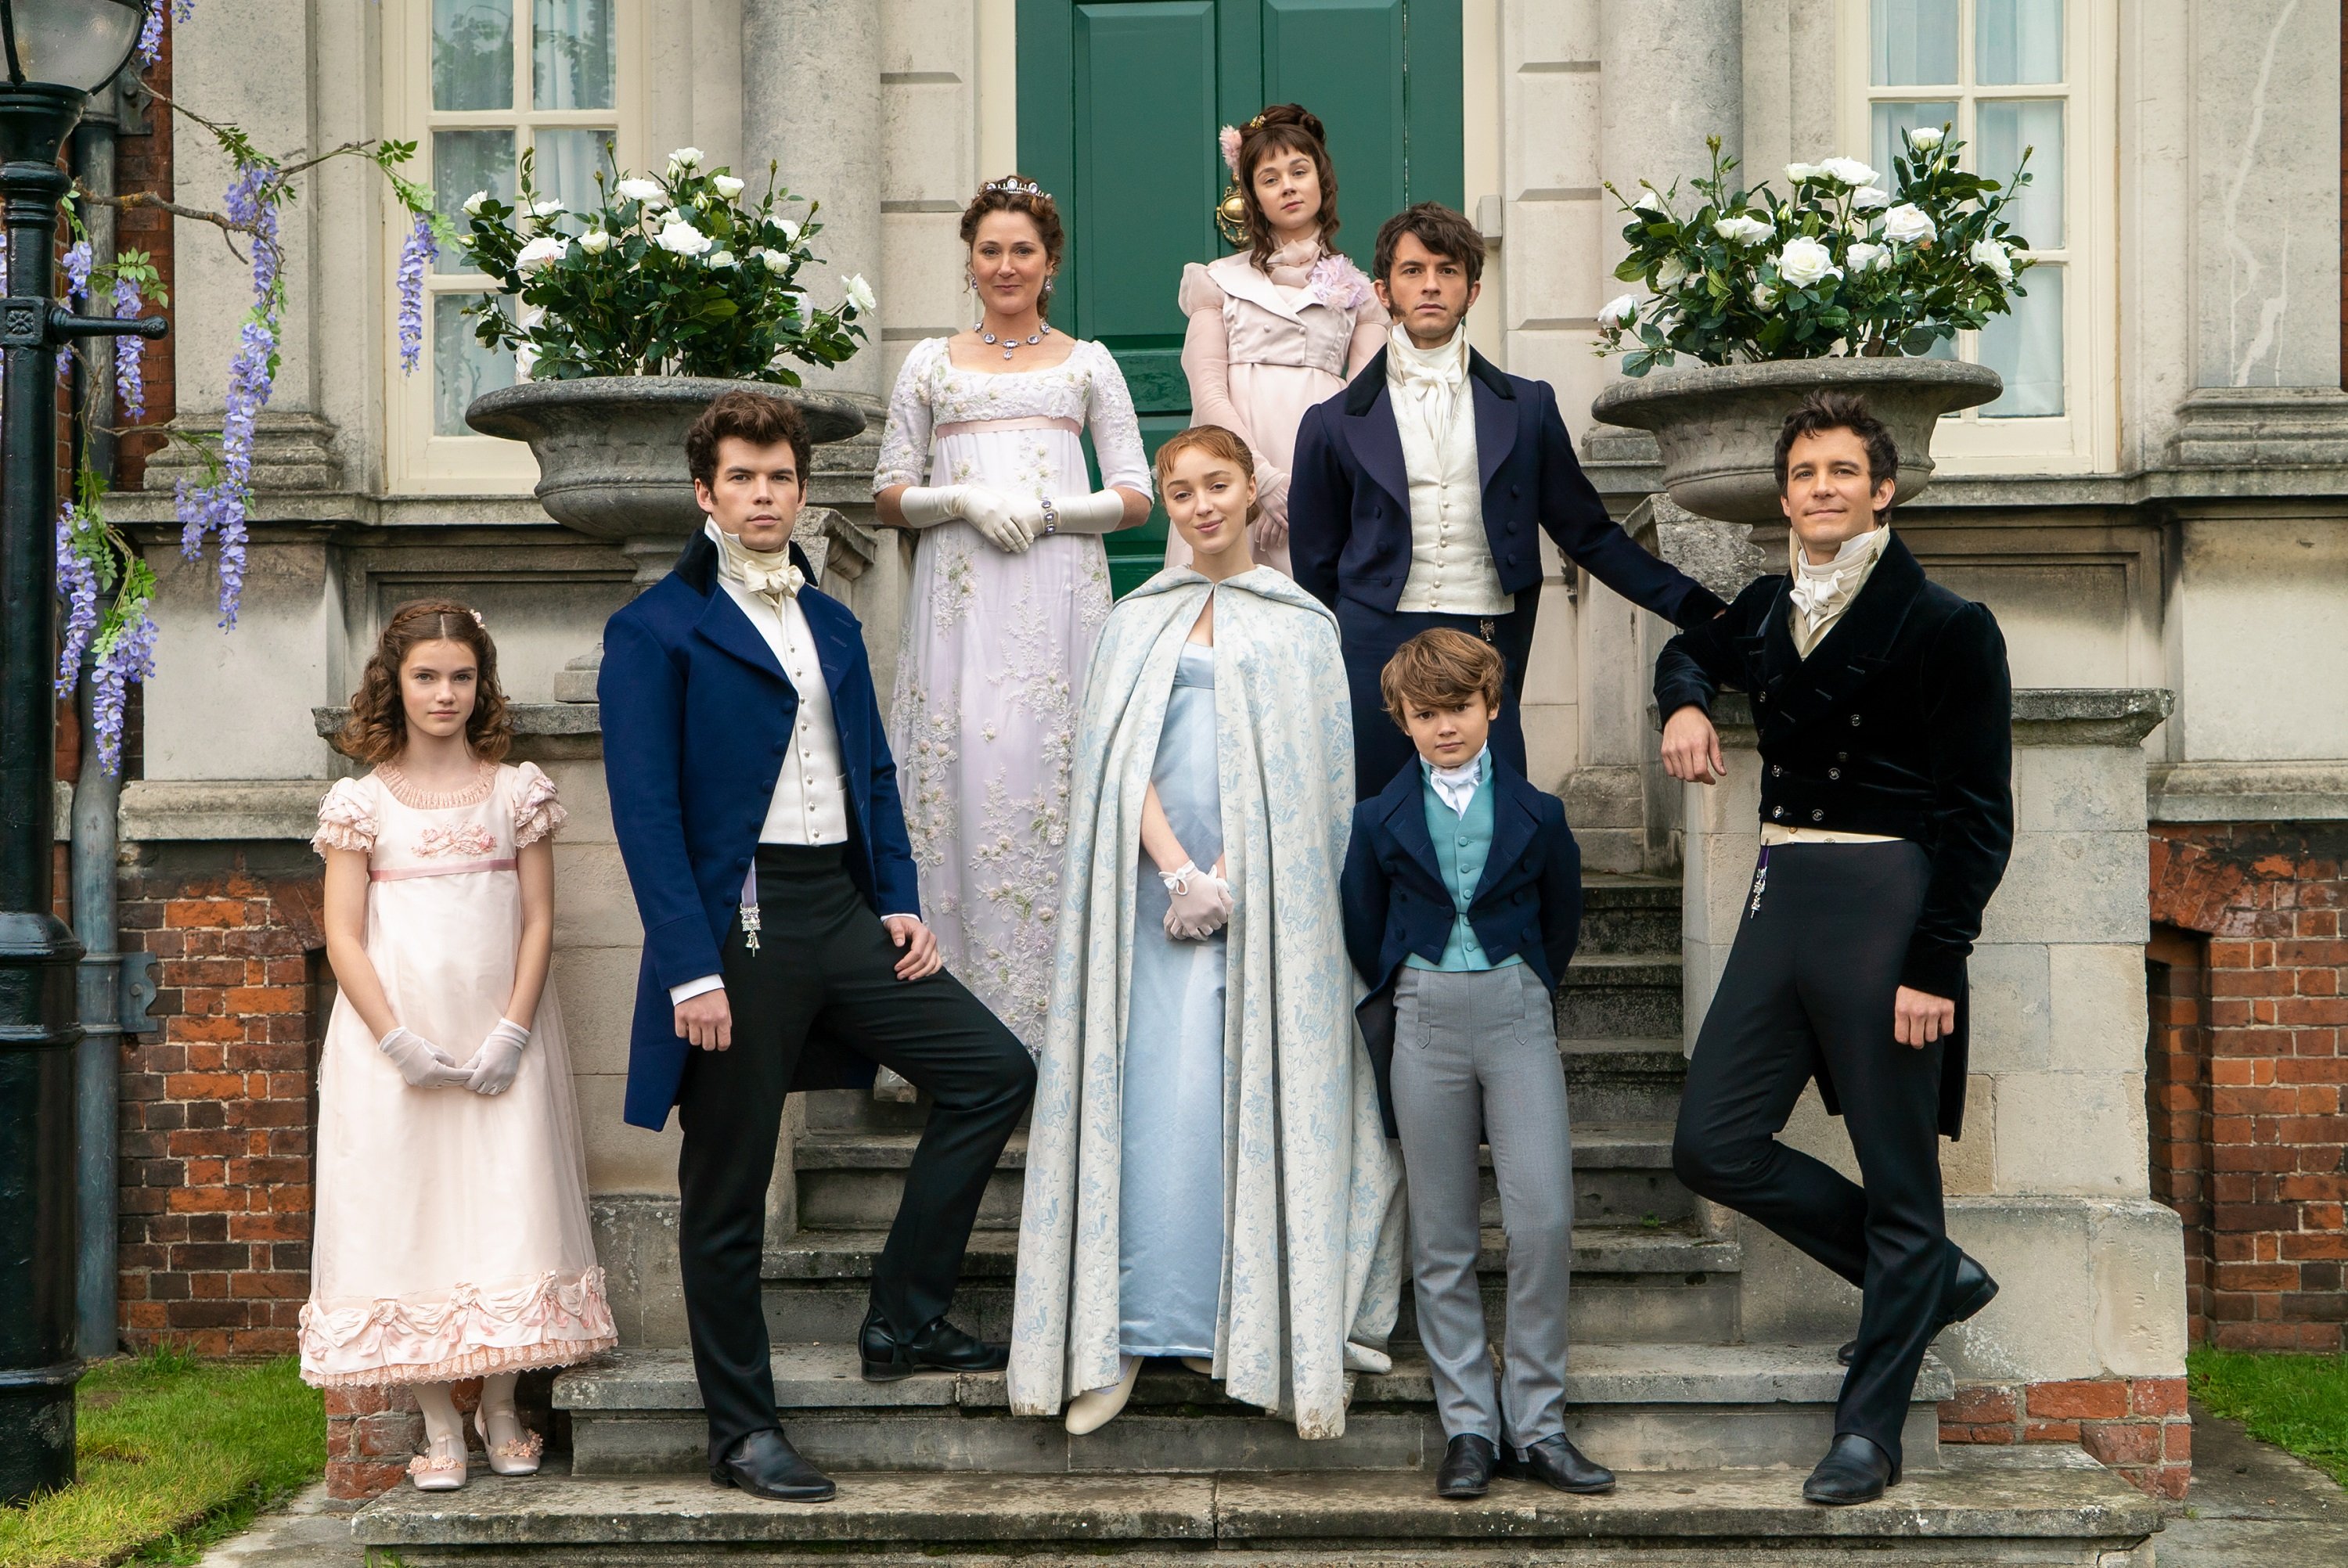 The 'Bridgerton' siblings pose for the camera with their mother from left to right: Florence Hunt as Hyacinth, Luke Newton as Colin, Ruth Gemmell as Lady Violet Bridgerton, Phoebe Dynevor as Daphne, Claudia Jessie as Eloise, Jonathan Bailey as Anthony, Will Tilston as Gregory, and Luke Thompson as Benedict.